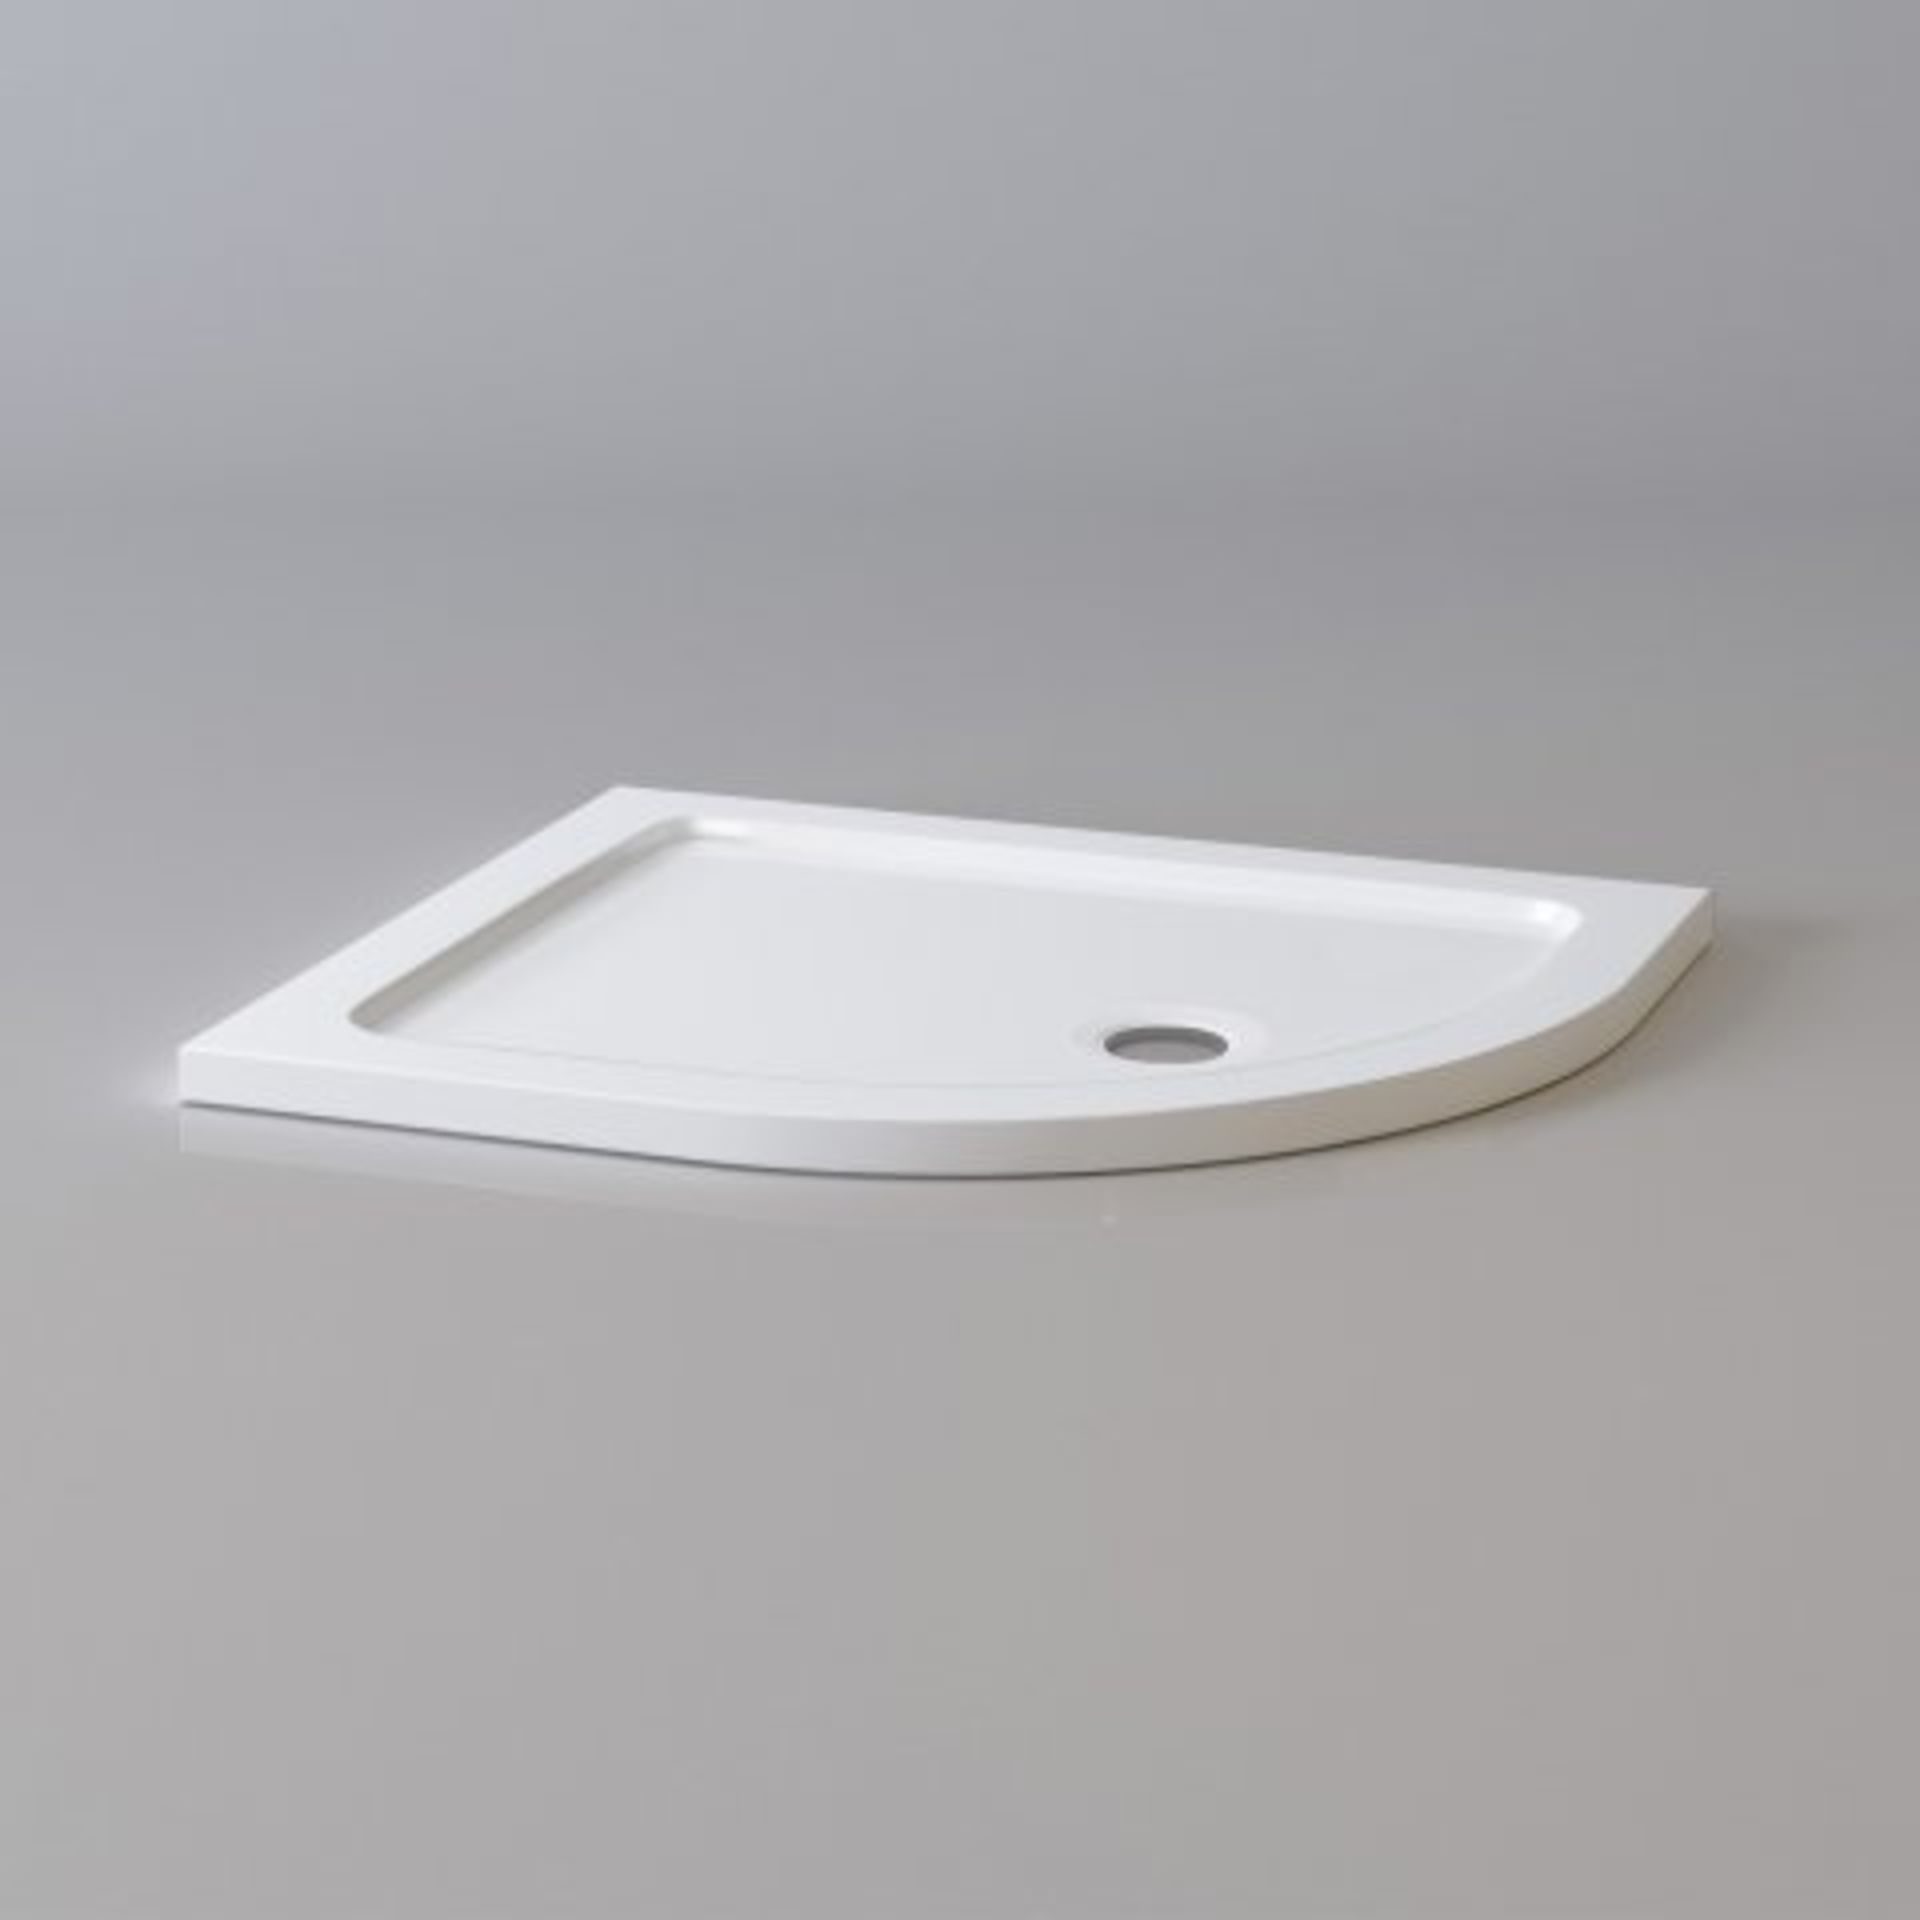 (P269) 900x760mm Offset Quadrant Ultraslim Stone Shower Tray - Right. RRP £224.99. Magnificently